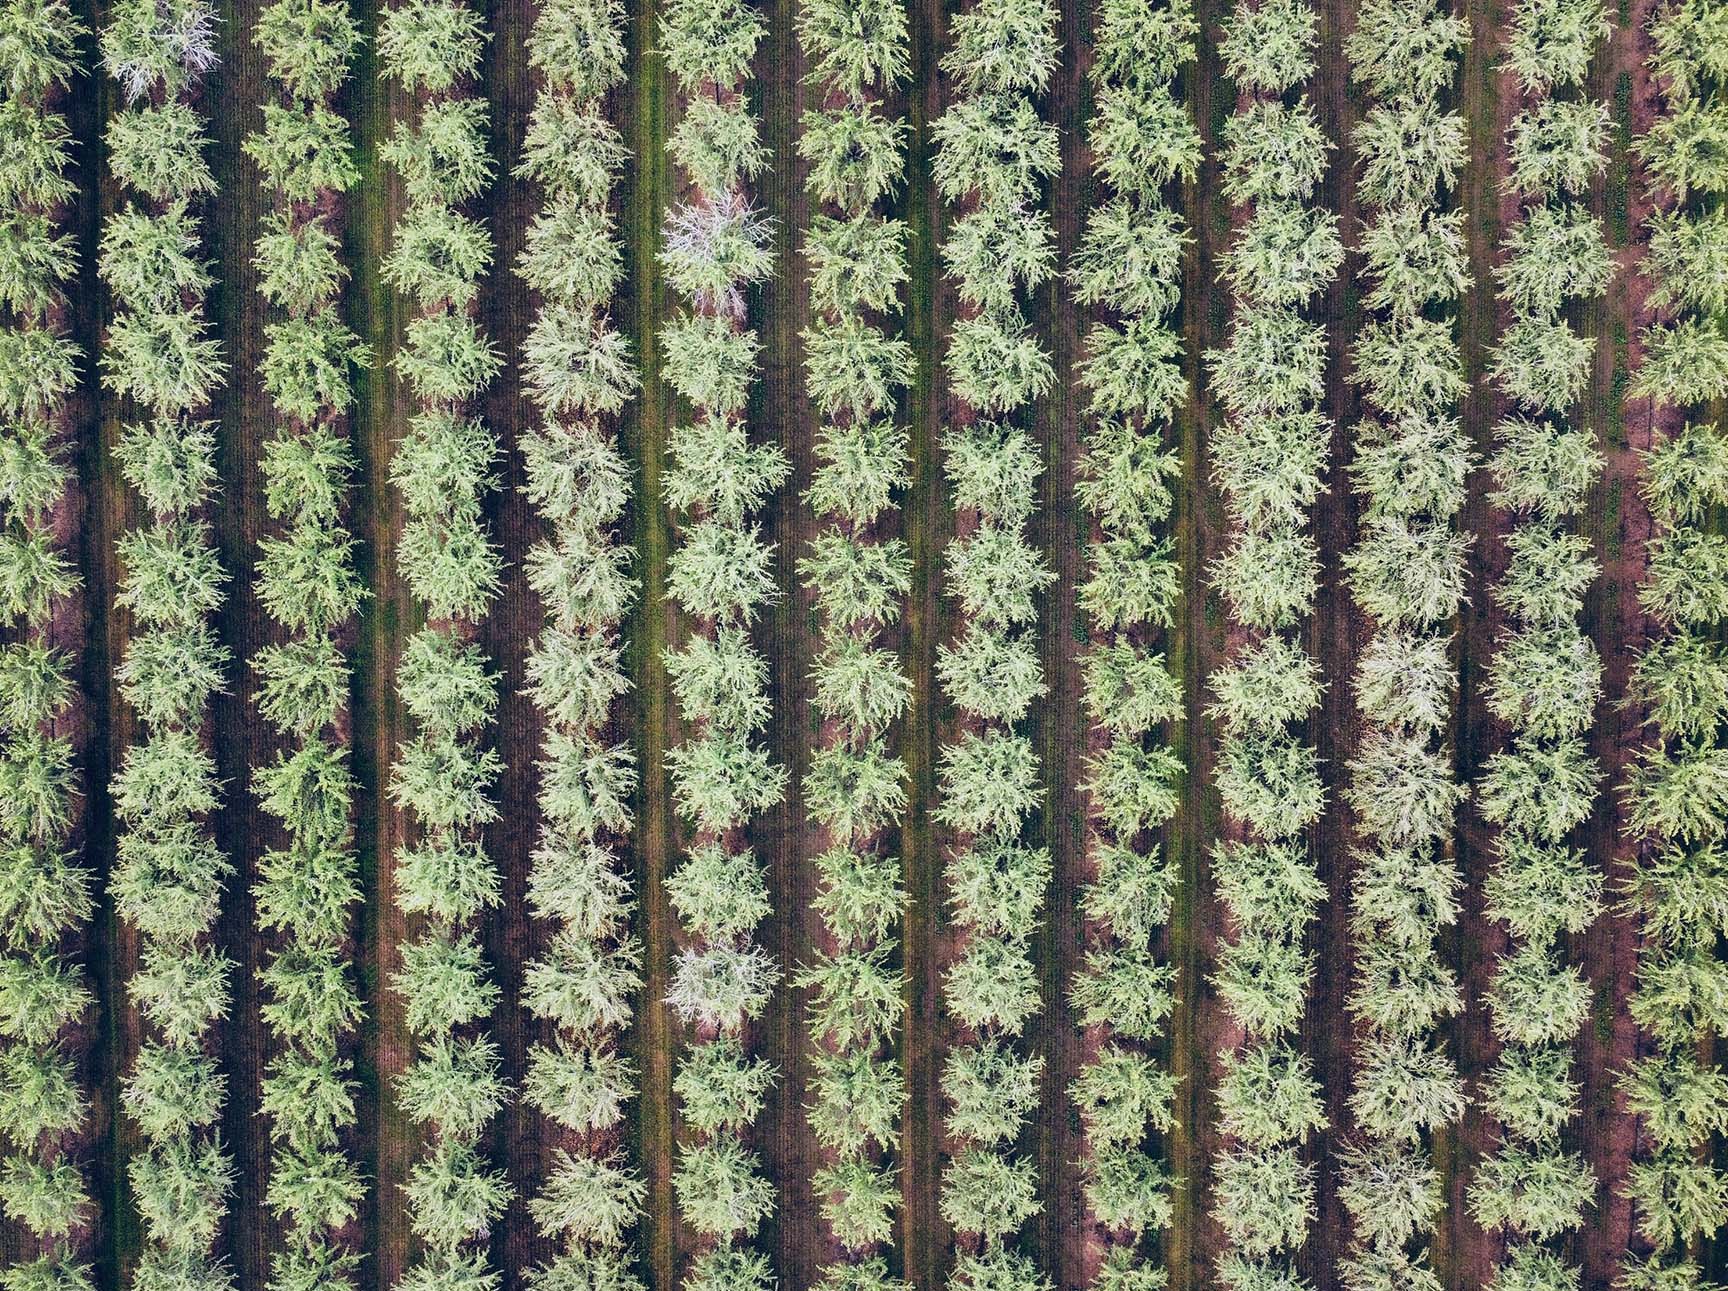 An arial shot of an almond orchard